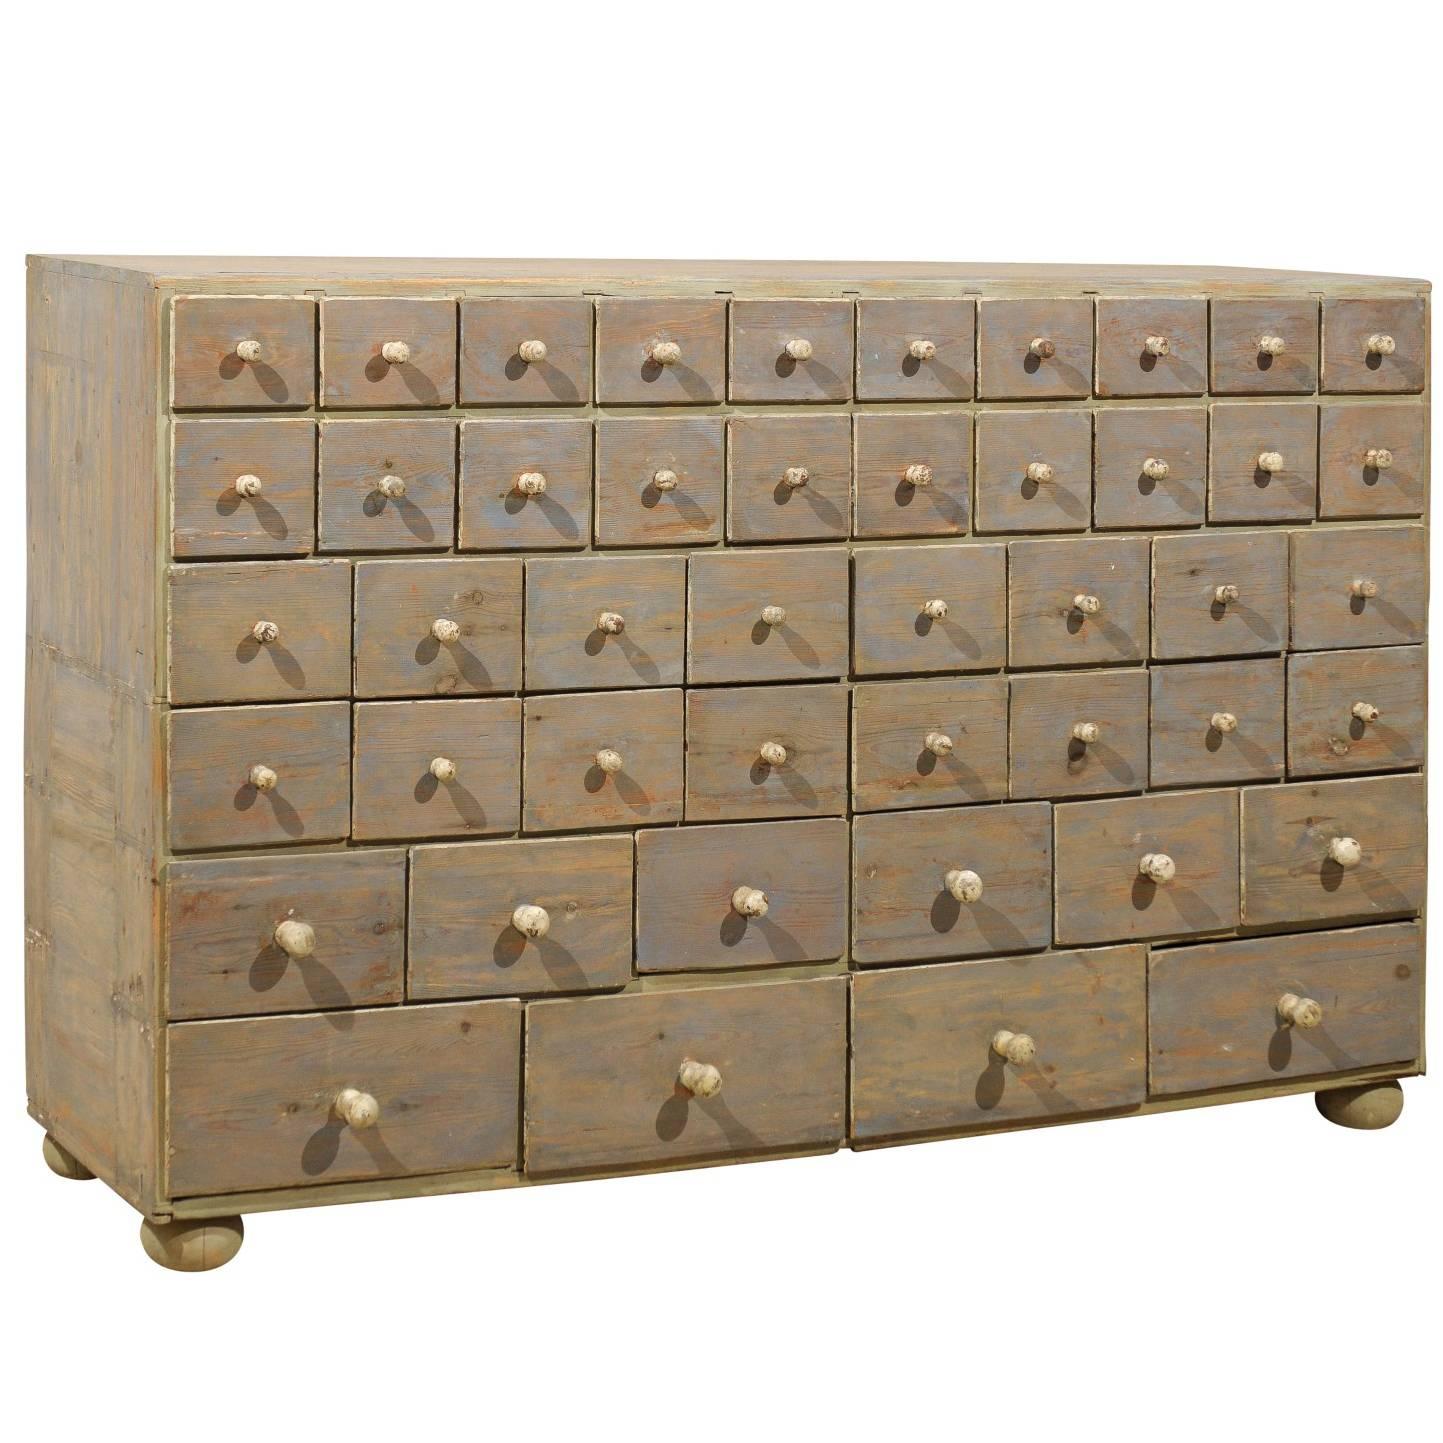 Swedish Apothecary Chest from the 19th Century